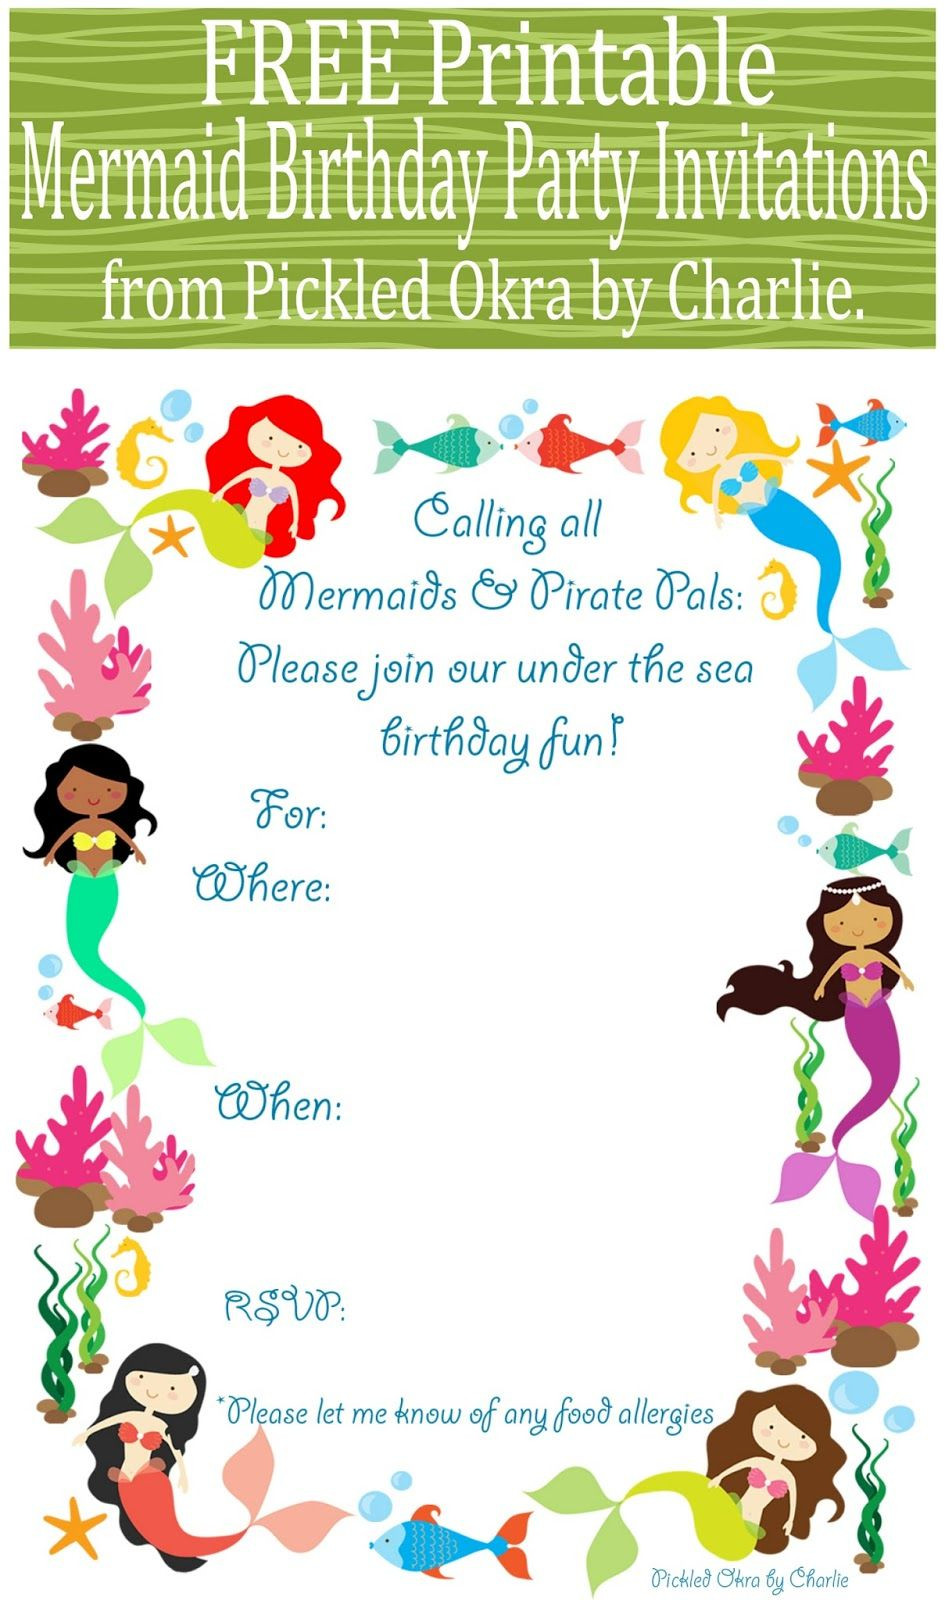 Free Birthday Party Printables Decorations
 Pickled Okra by Charlie Mermaid Bithday Party Invitations